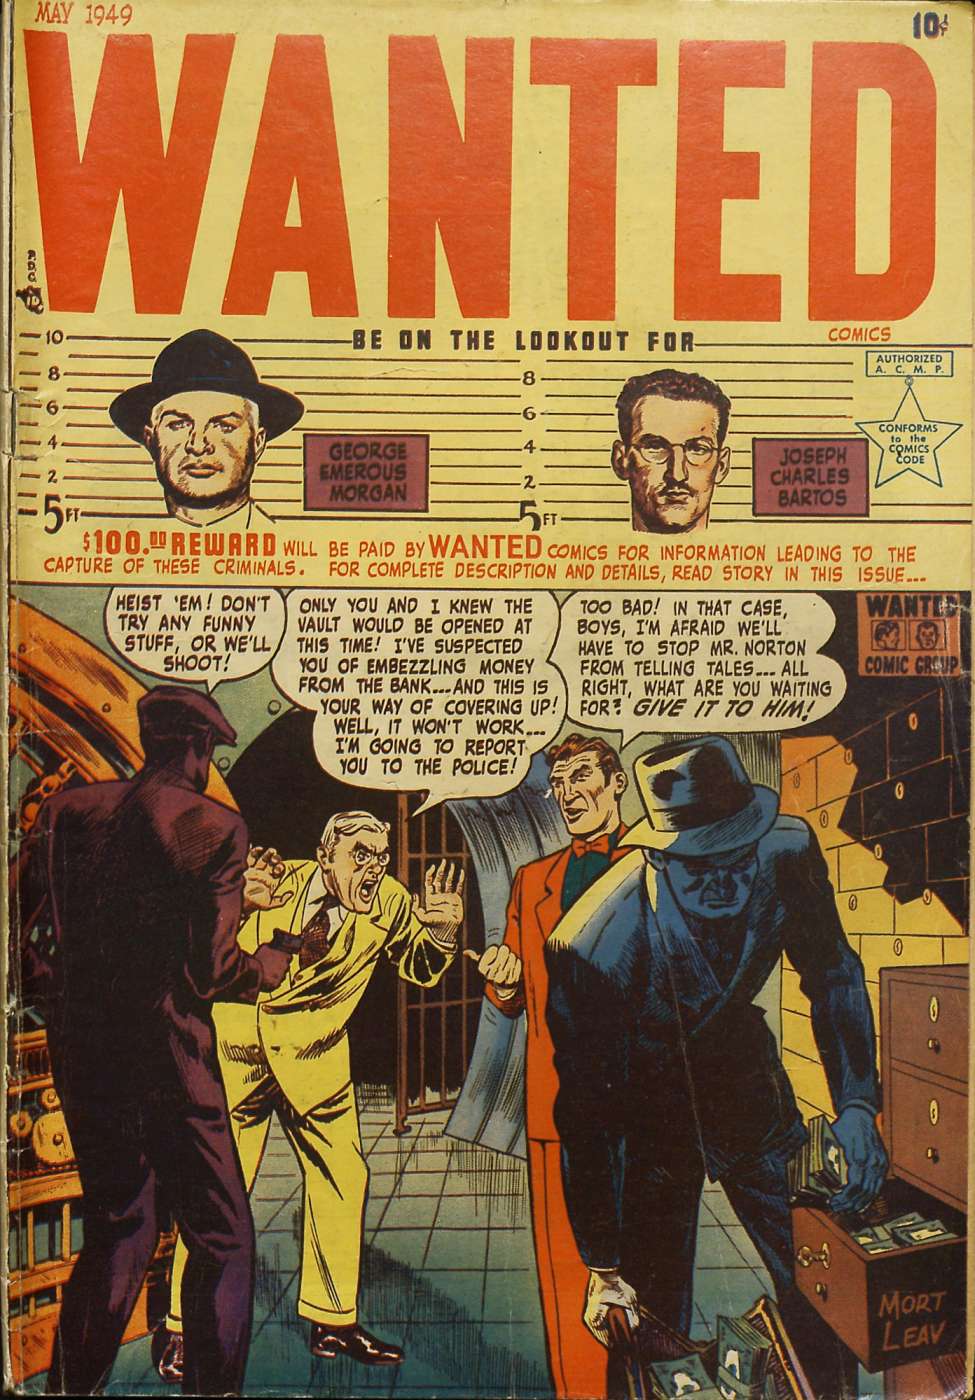 Comic Book Cover For Wanted Comics 20 (alt) - Version 2